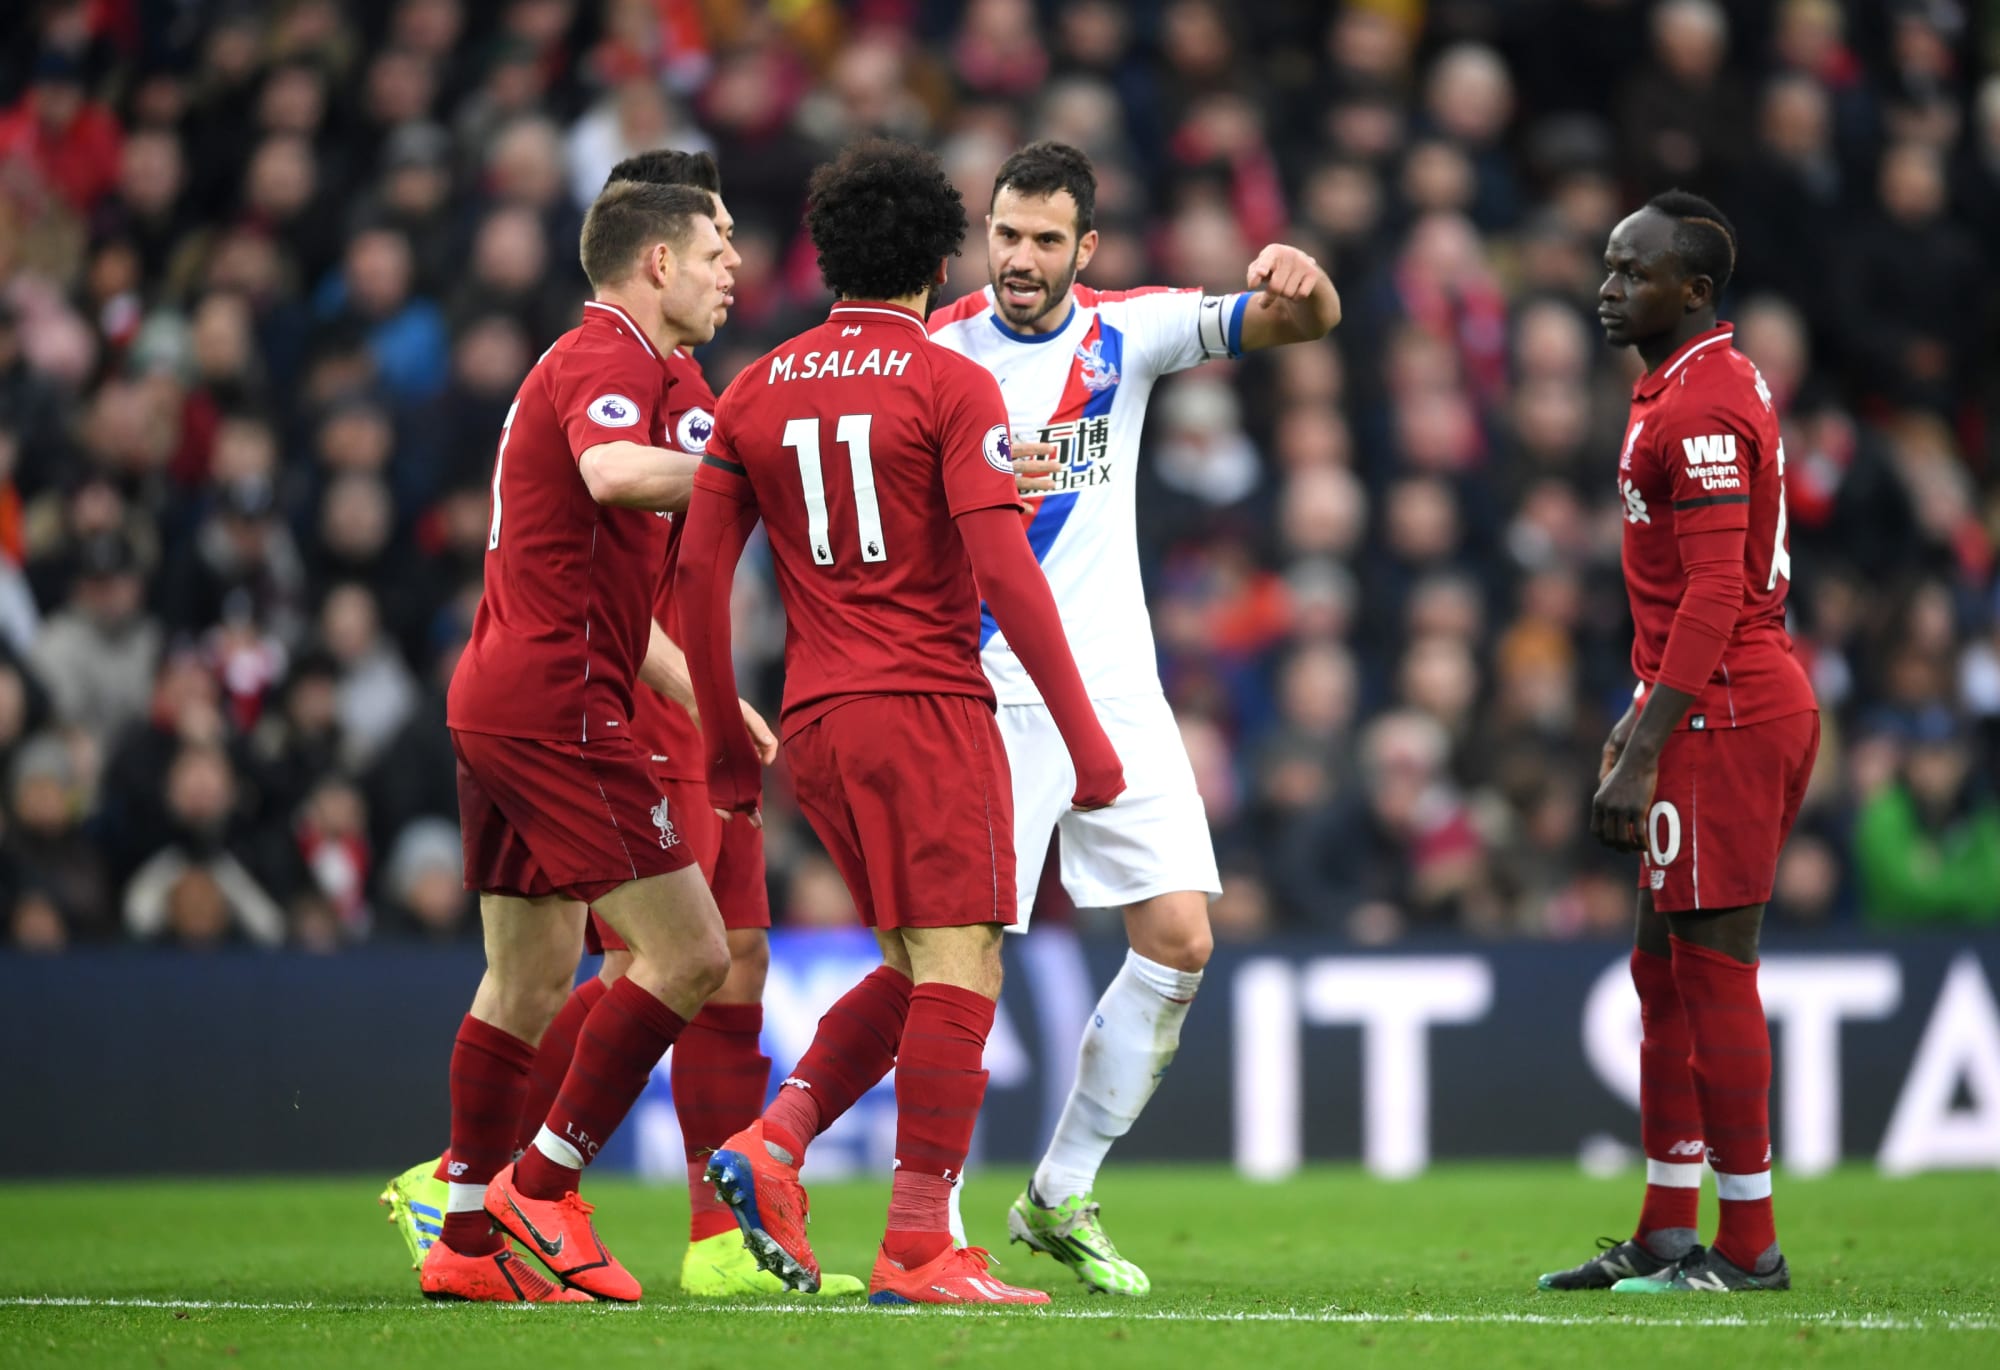 Liverpool vs Crystal Palace live stream: Watch the boys avoid